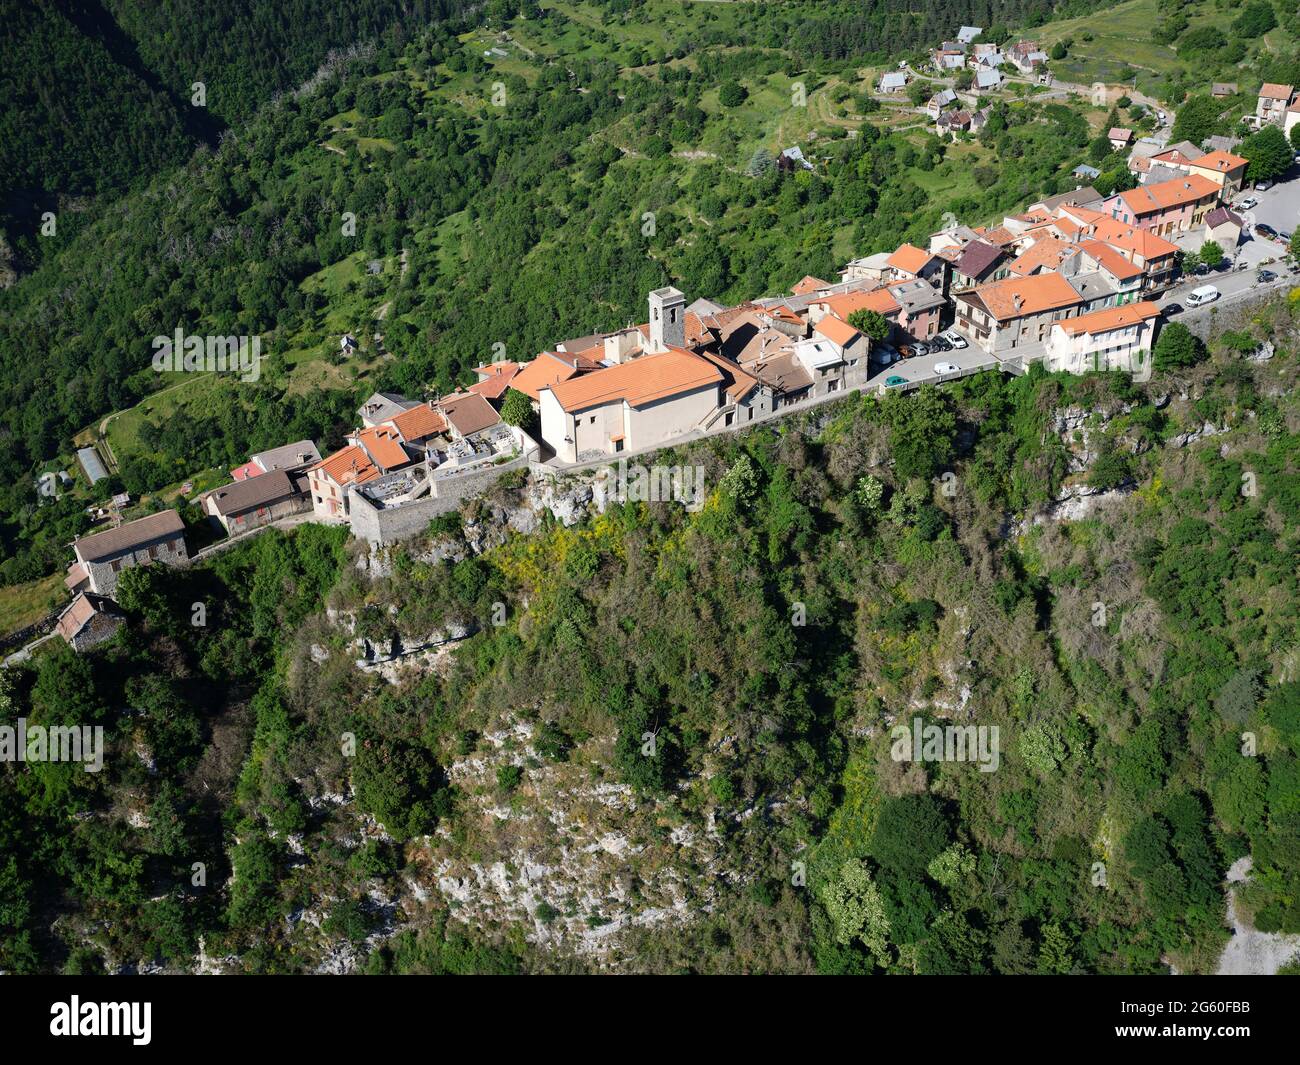 AERIAL VIEW. Medieval village perched on a long and narrow limestone ridge high above the Vésubie Valley. Alpes-Maritimes, France. Stock Photo